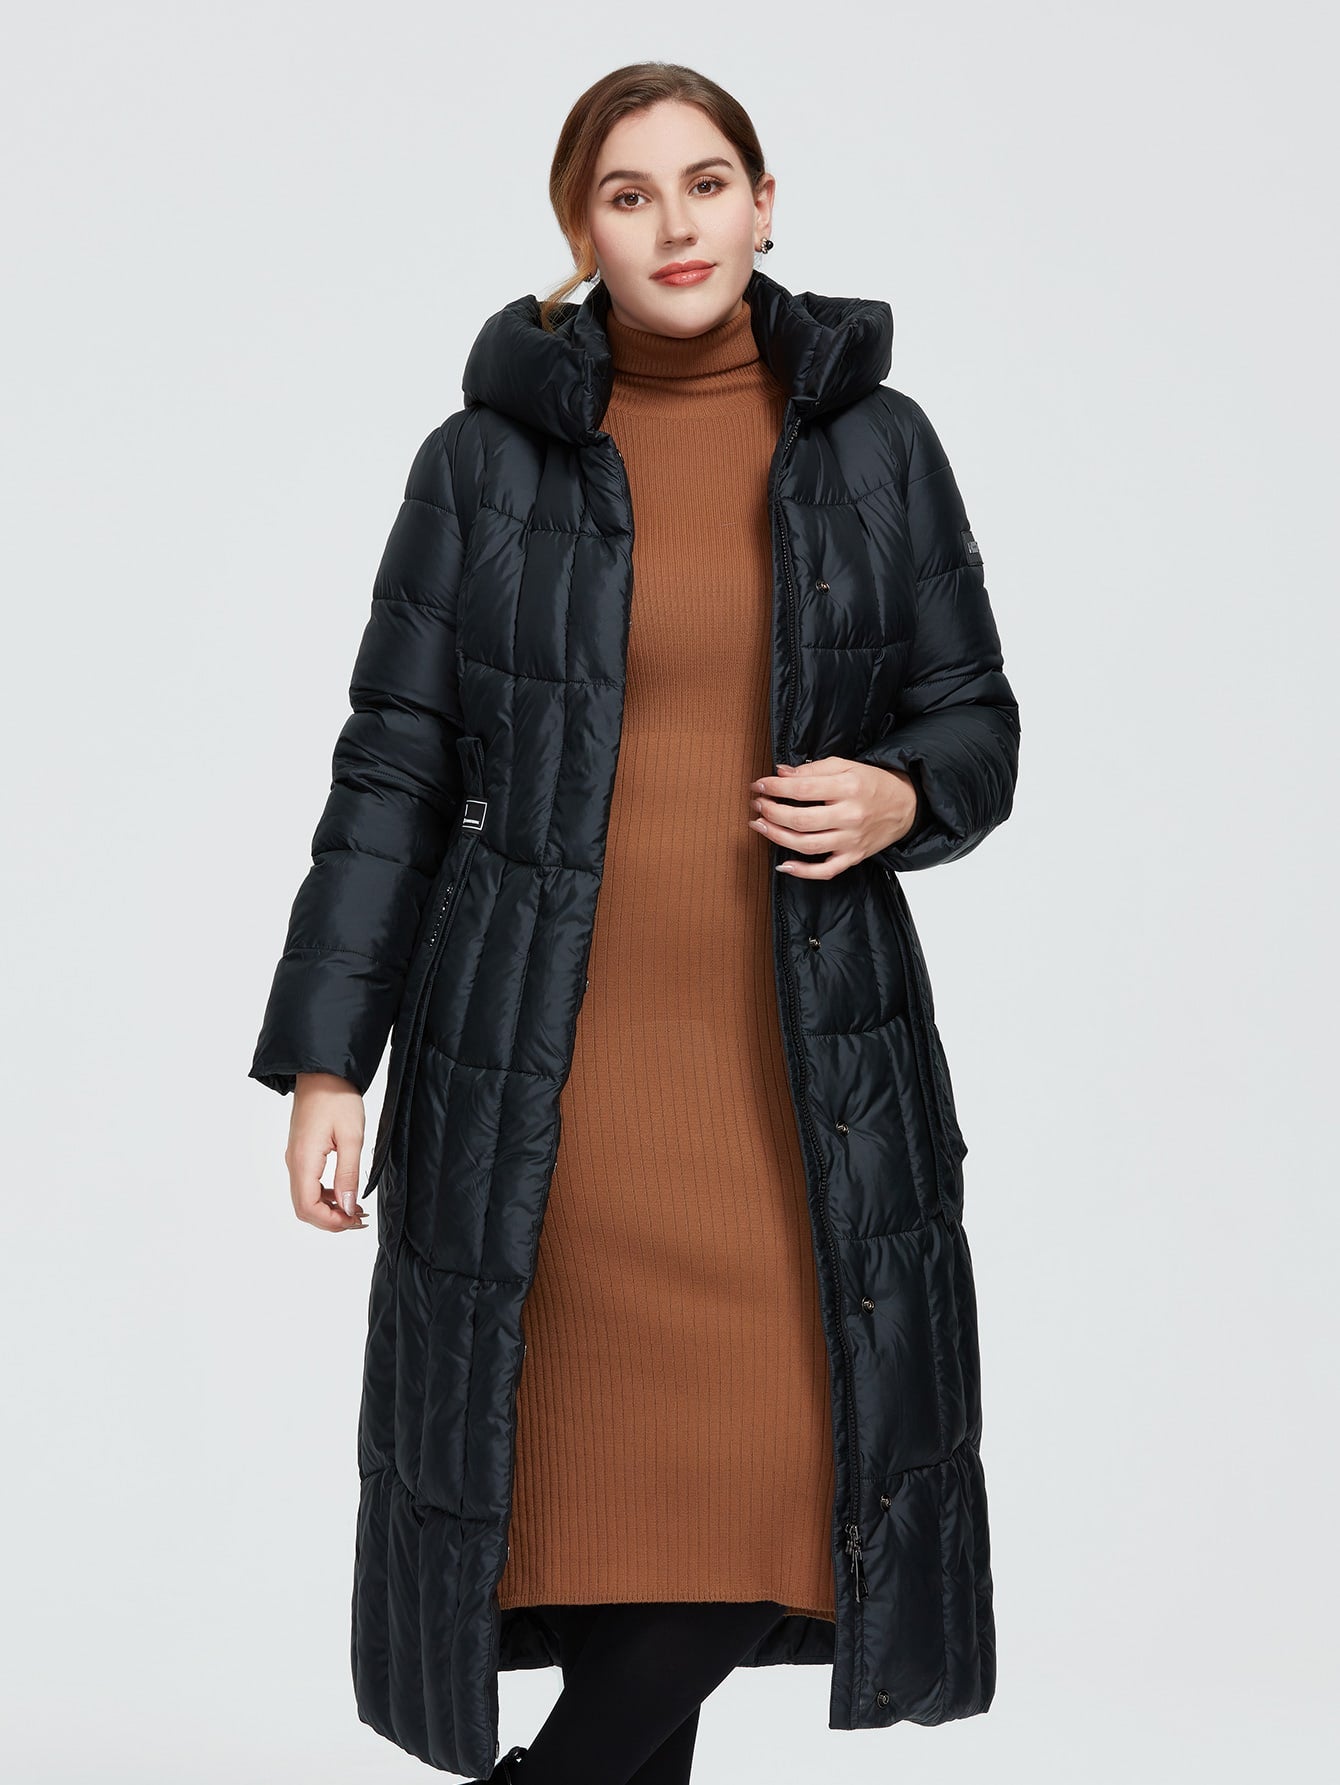 Plus Zip-Up Pocket Side Hooded Puffer Coat: Embrace Superior Style and Winter Warmth